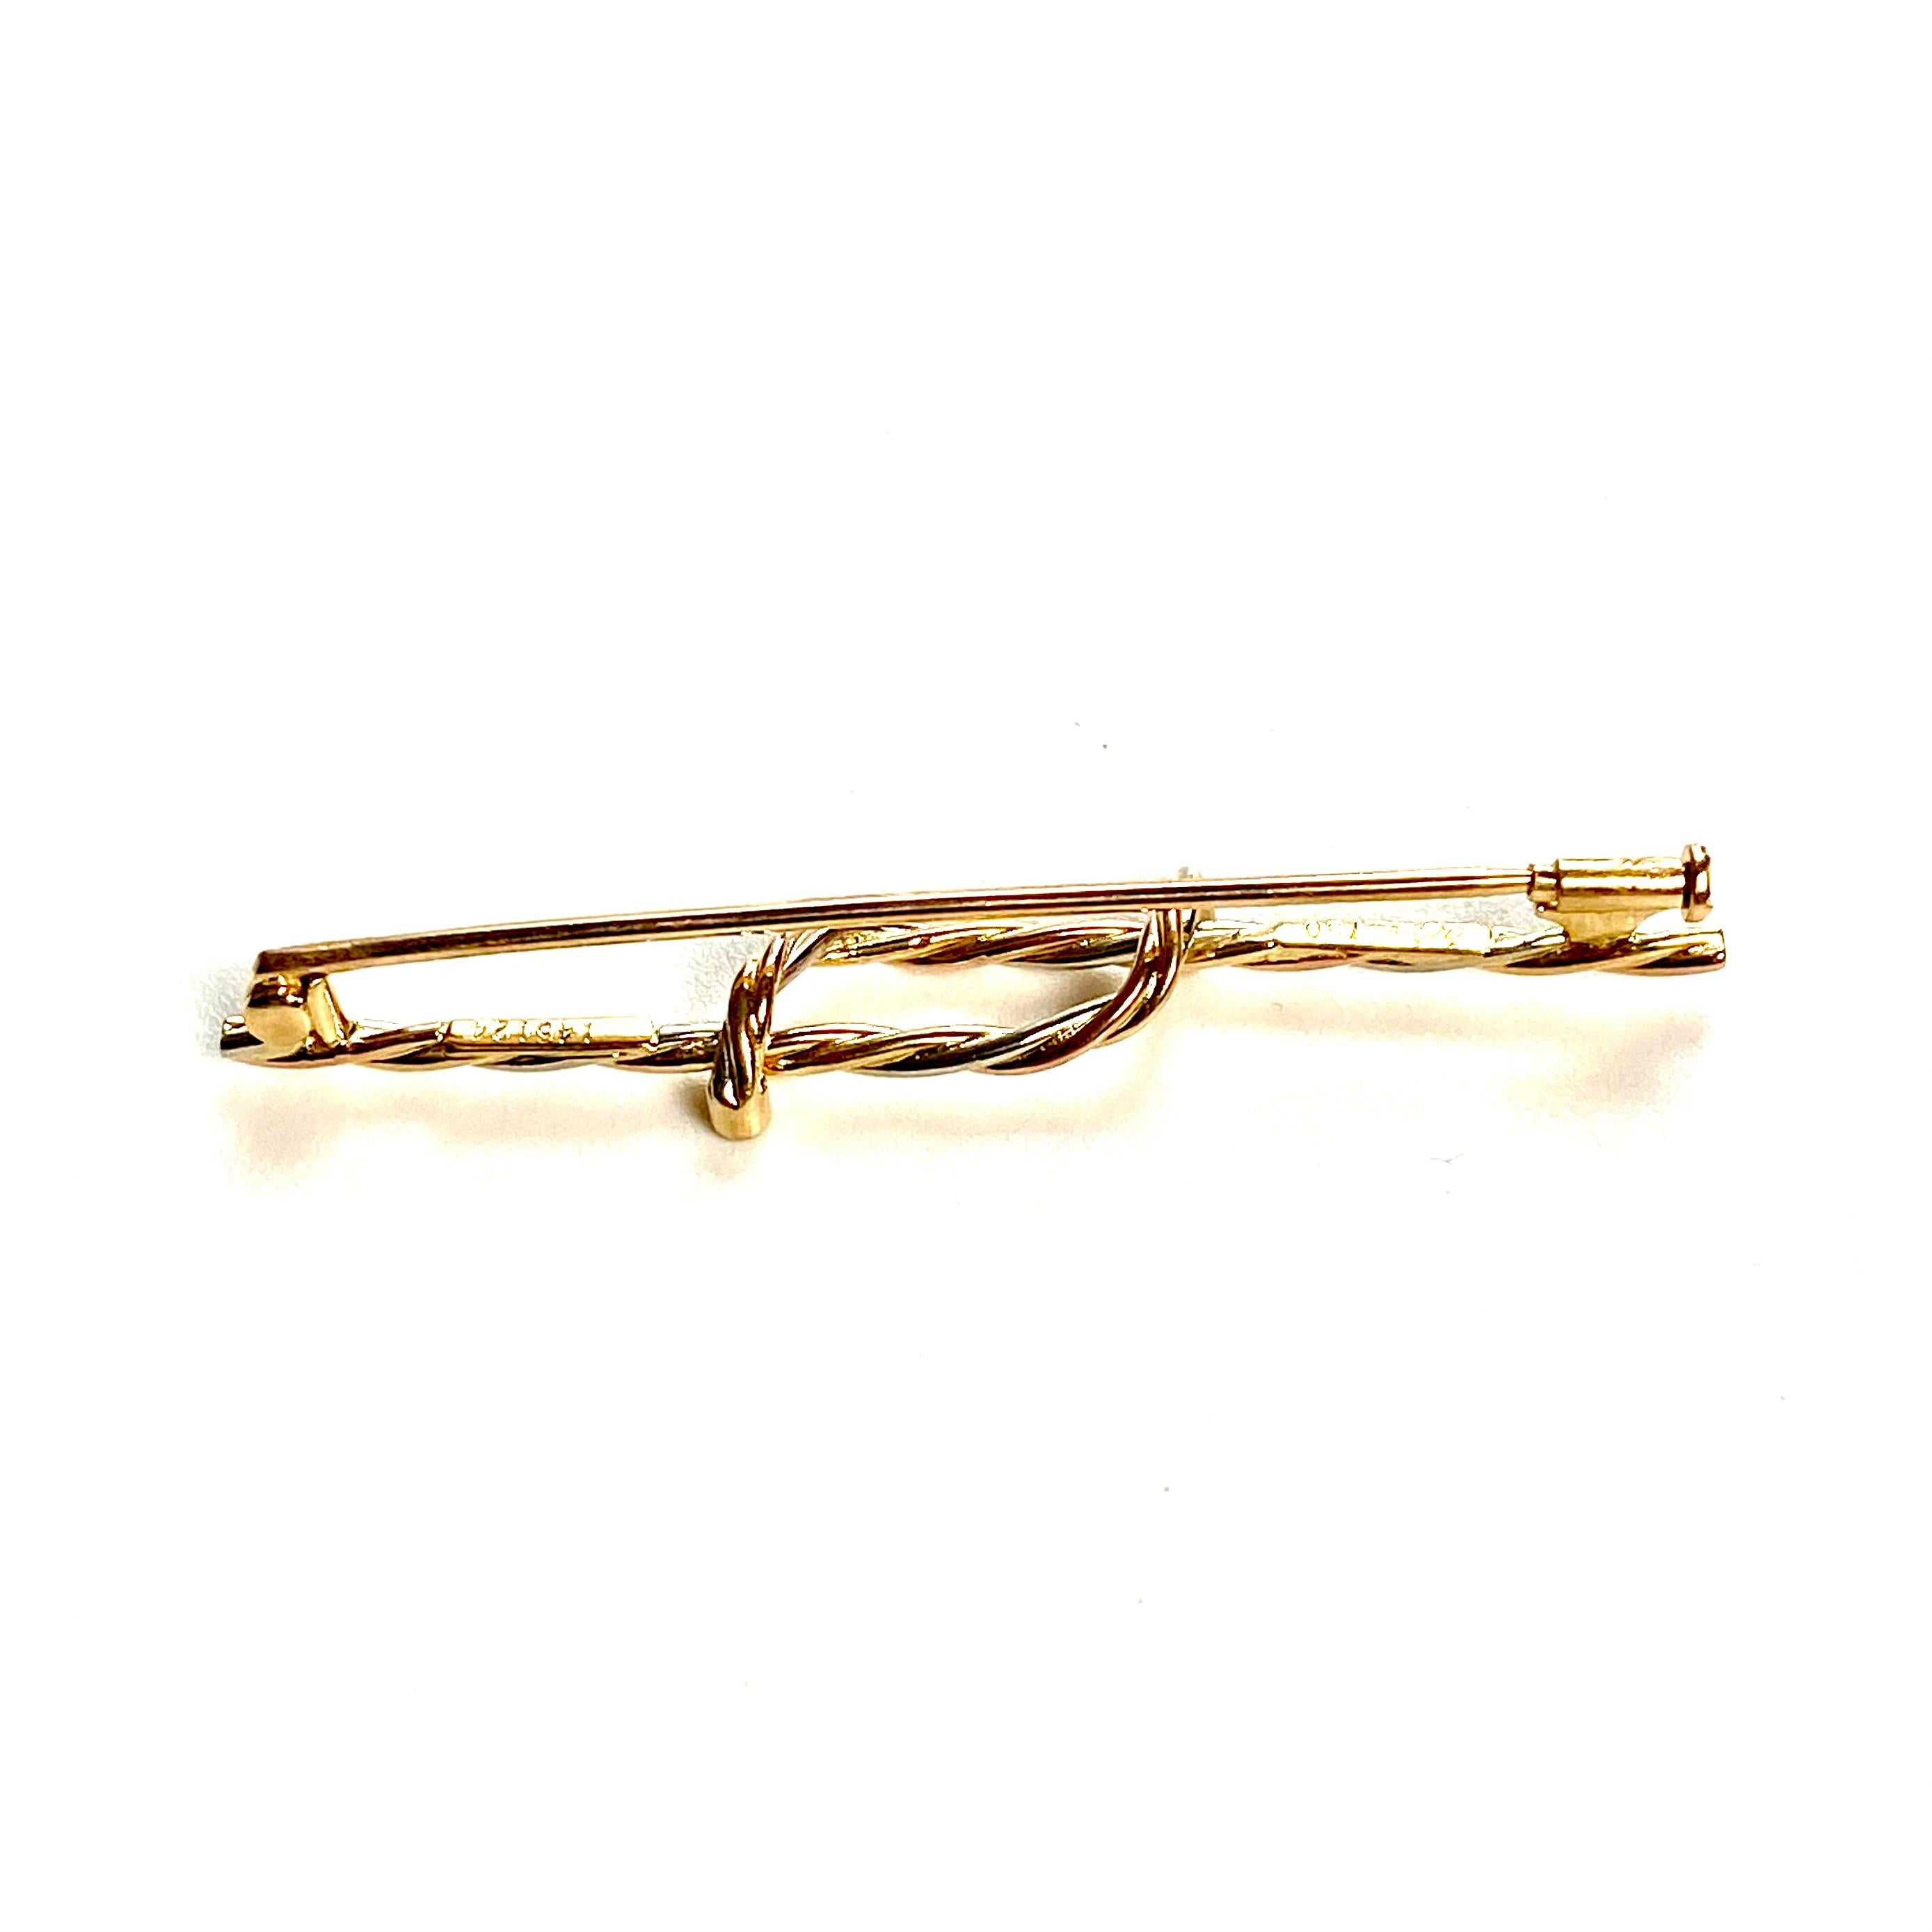 Introducing the exquisite Vintage Cartier 18 Karat Gold Tritone Rope Twist Design Diamond Brooch signed Cartier, 750, #145124, measuring 2.05 inch in length – a true masterpiece that embodies elegance, craftsmanship, and timeless allure. This